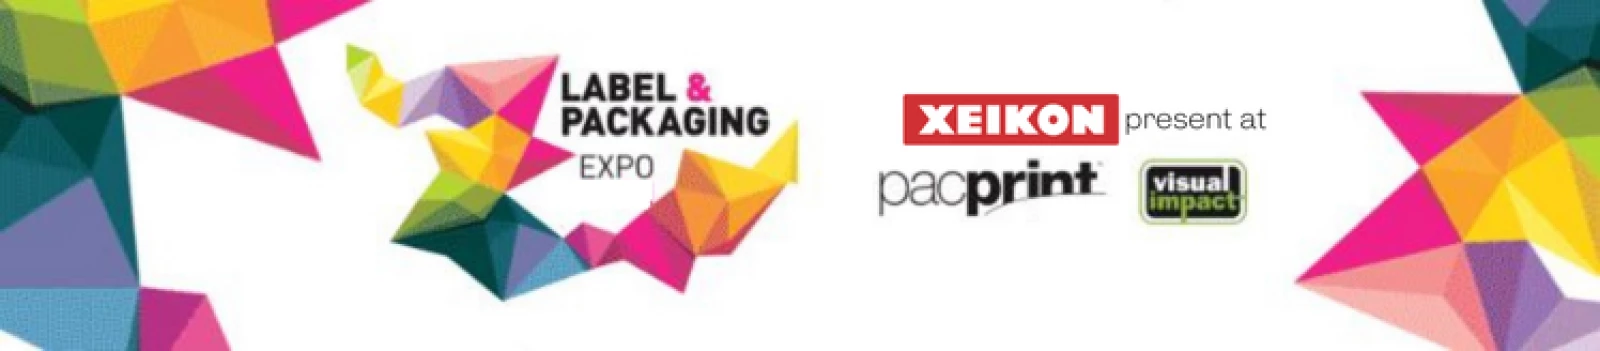 Xeikon set for Australian premiere of Panther PX3300 UV inkjet label press at PacPrint 2022 Thumb